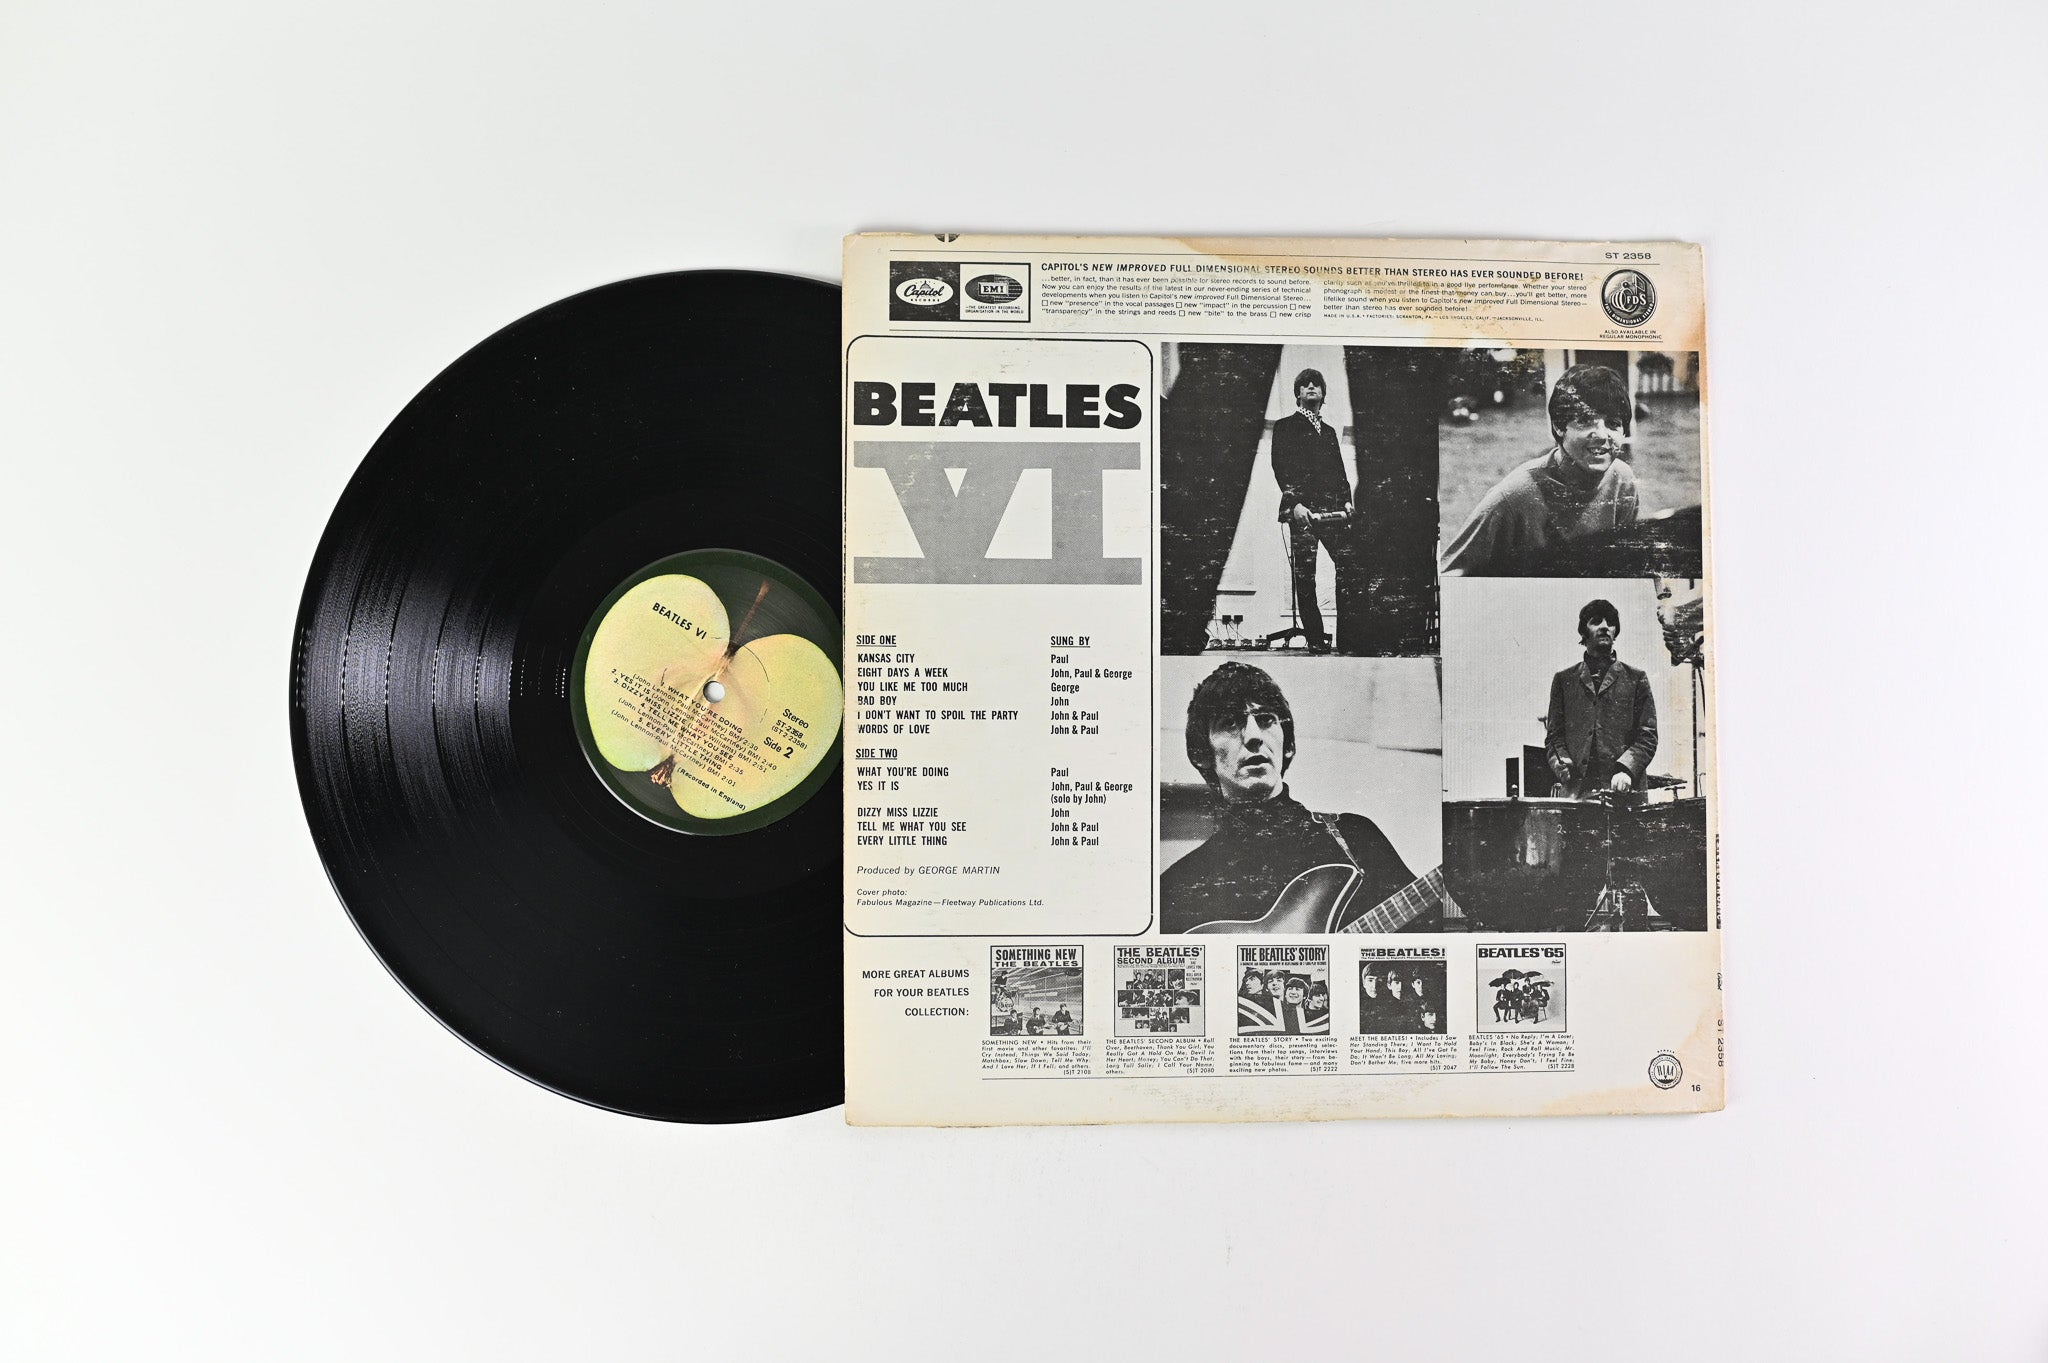 The Beatles - Beatles VI on Capitol Records Reissue